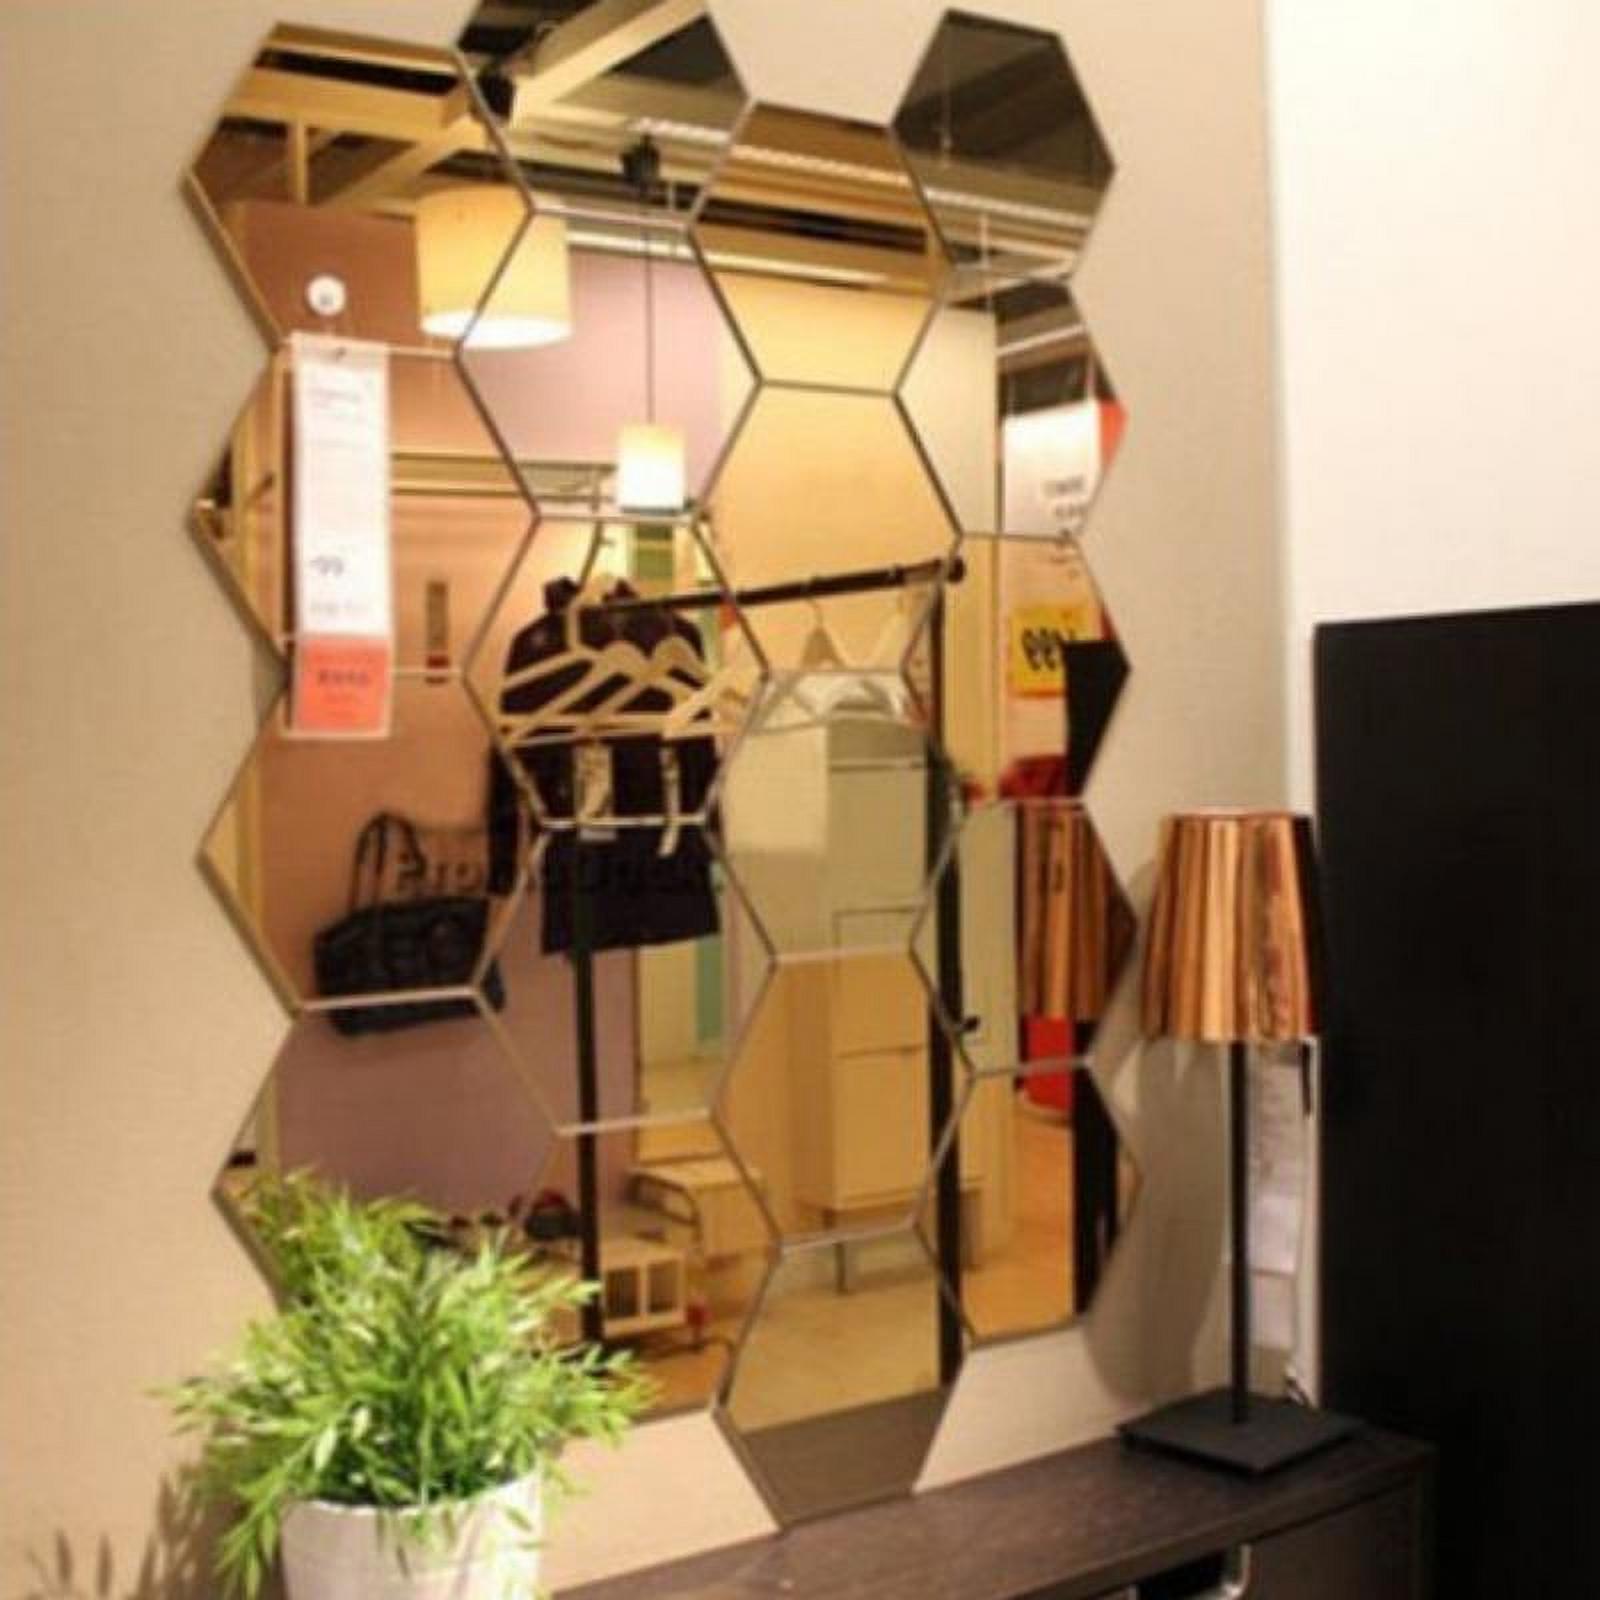 12pcs Acrylic Mirror Wall Stickers Self Adhesive Removable Hexagonal Decorative Mirror Sheet for Home Living Room Bedroom Decor, Size: Medium, Gold